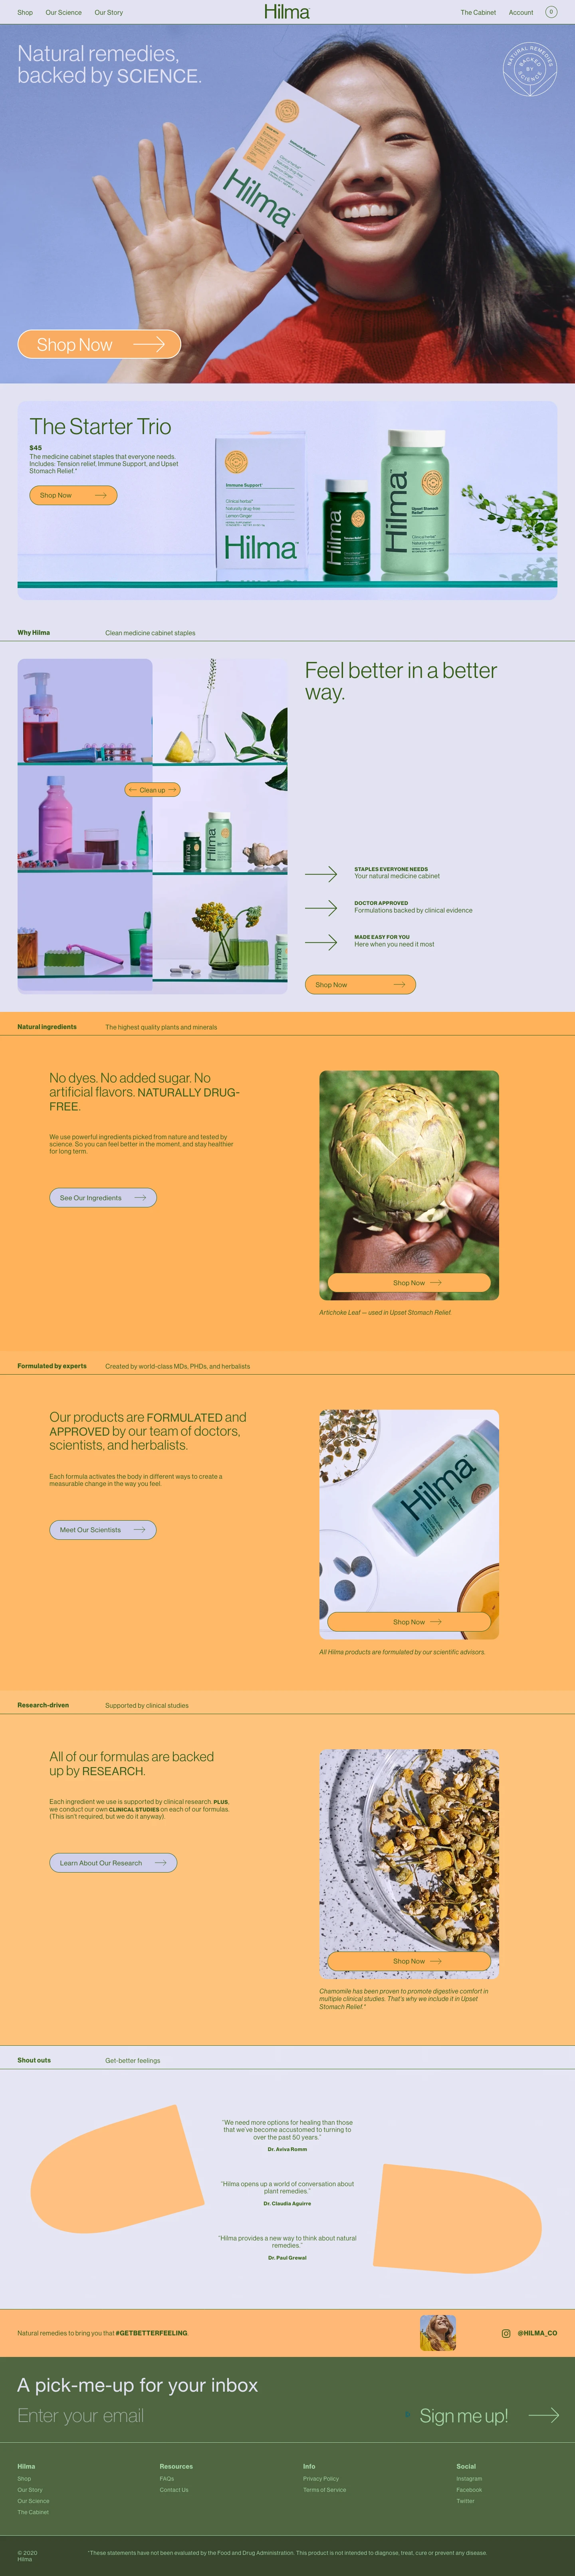 Hilma Landing Page Example: Natural remedies, backed by science. We’re taking natural remedies into the lab, creating the highest quality products to support your health when you need it most.